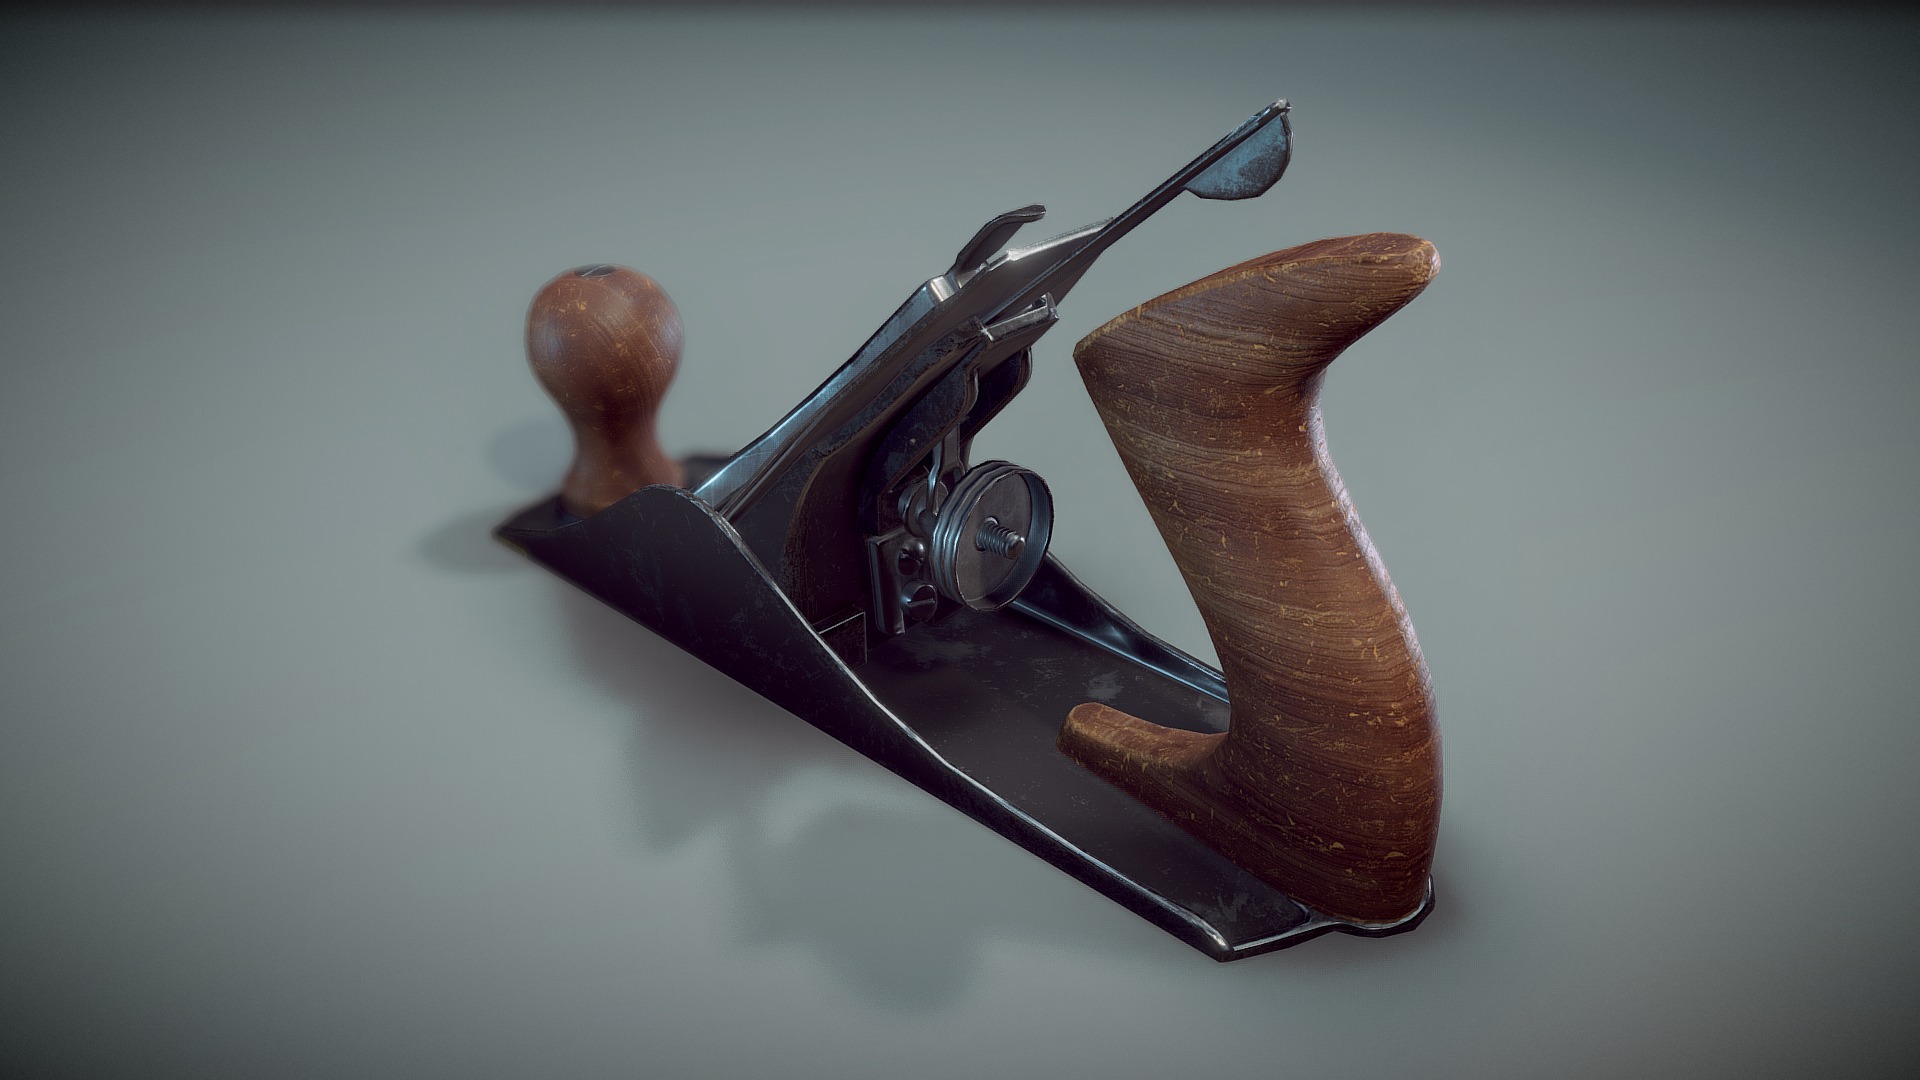 3D model stanley planar - This is a 3D model of the stanley planar. The 3D model is about a wooden key with a round handle.